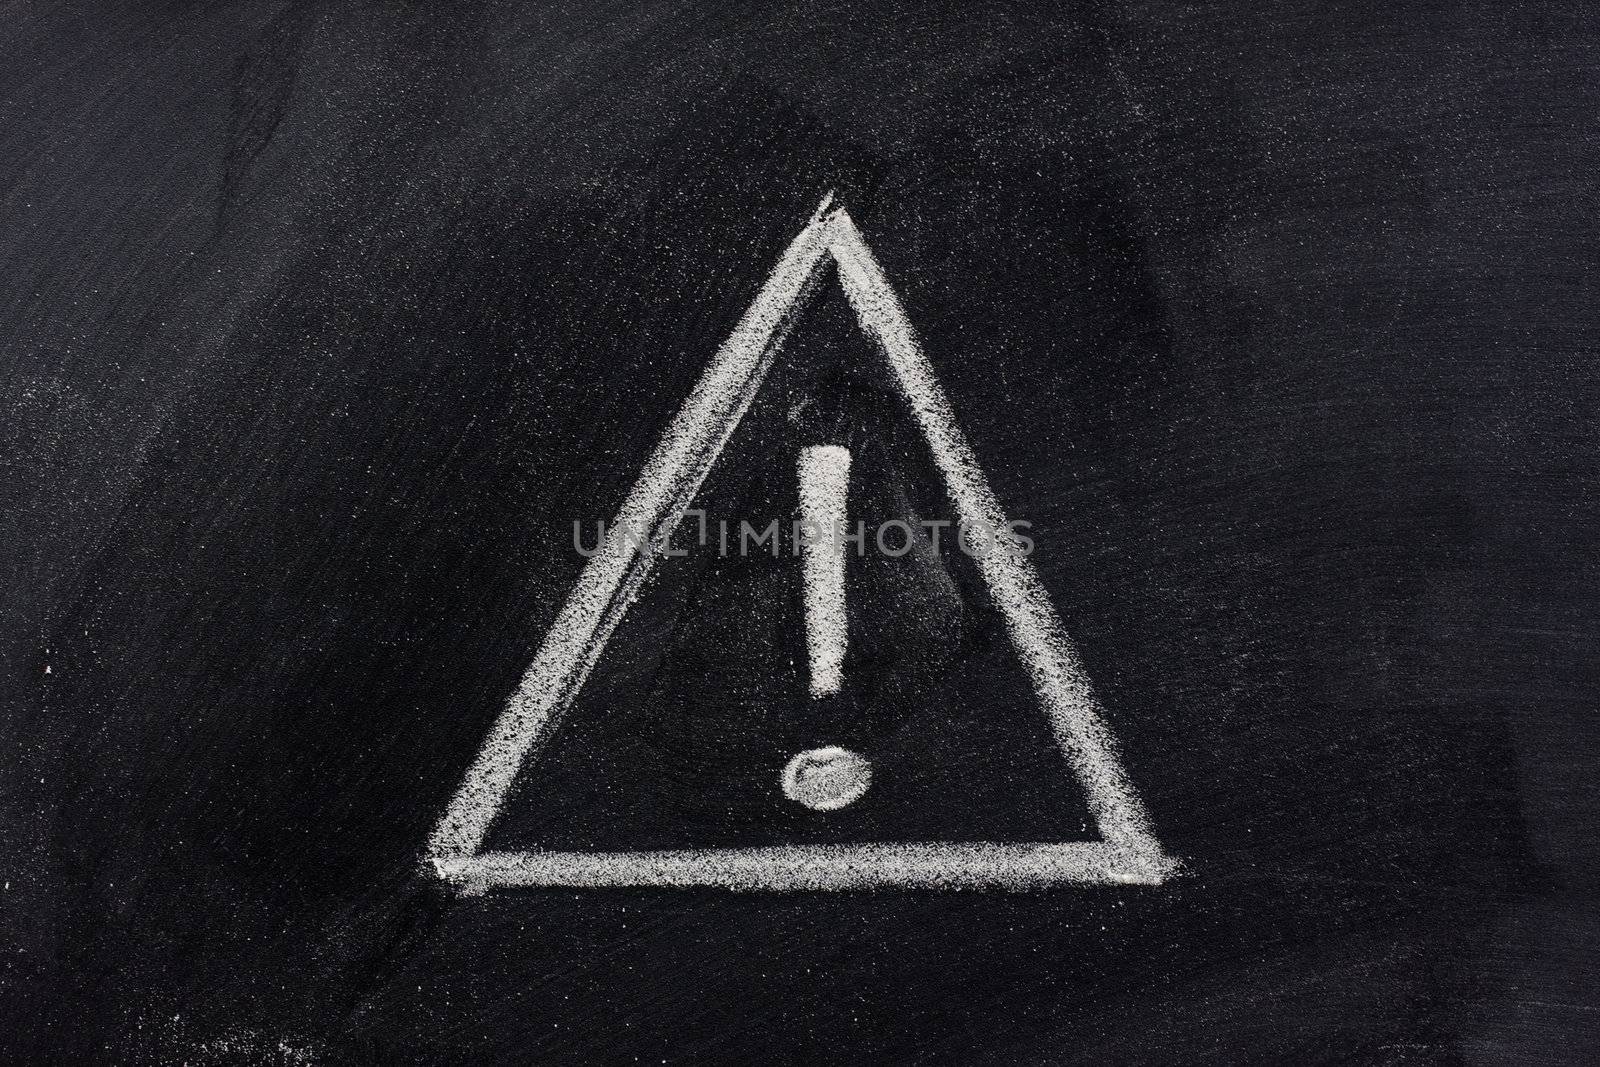 warning sign, exclamation mark inside a triangle, sketched with white chalk on blackboard